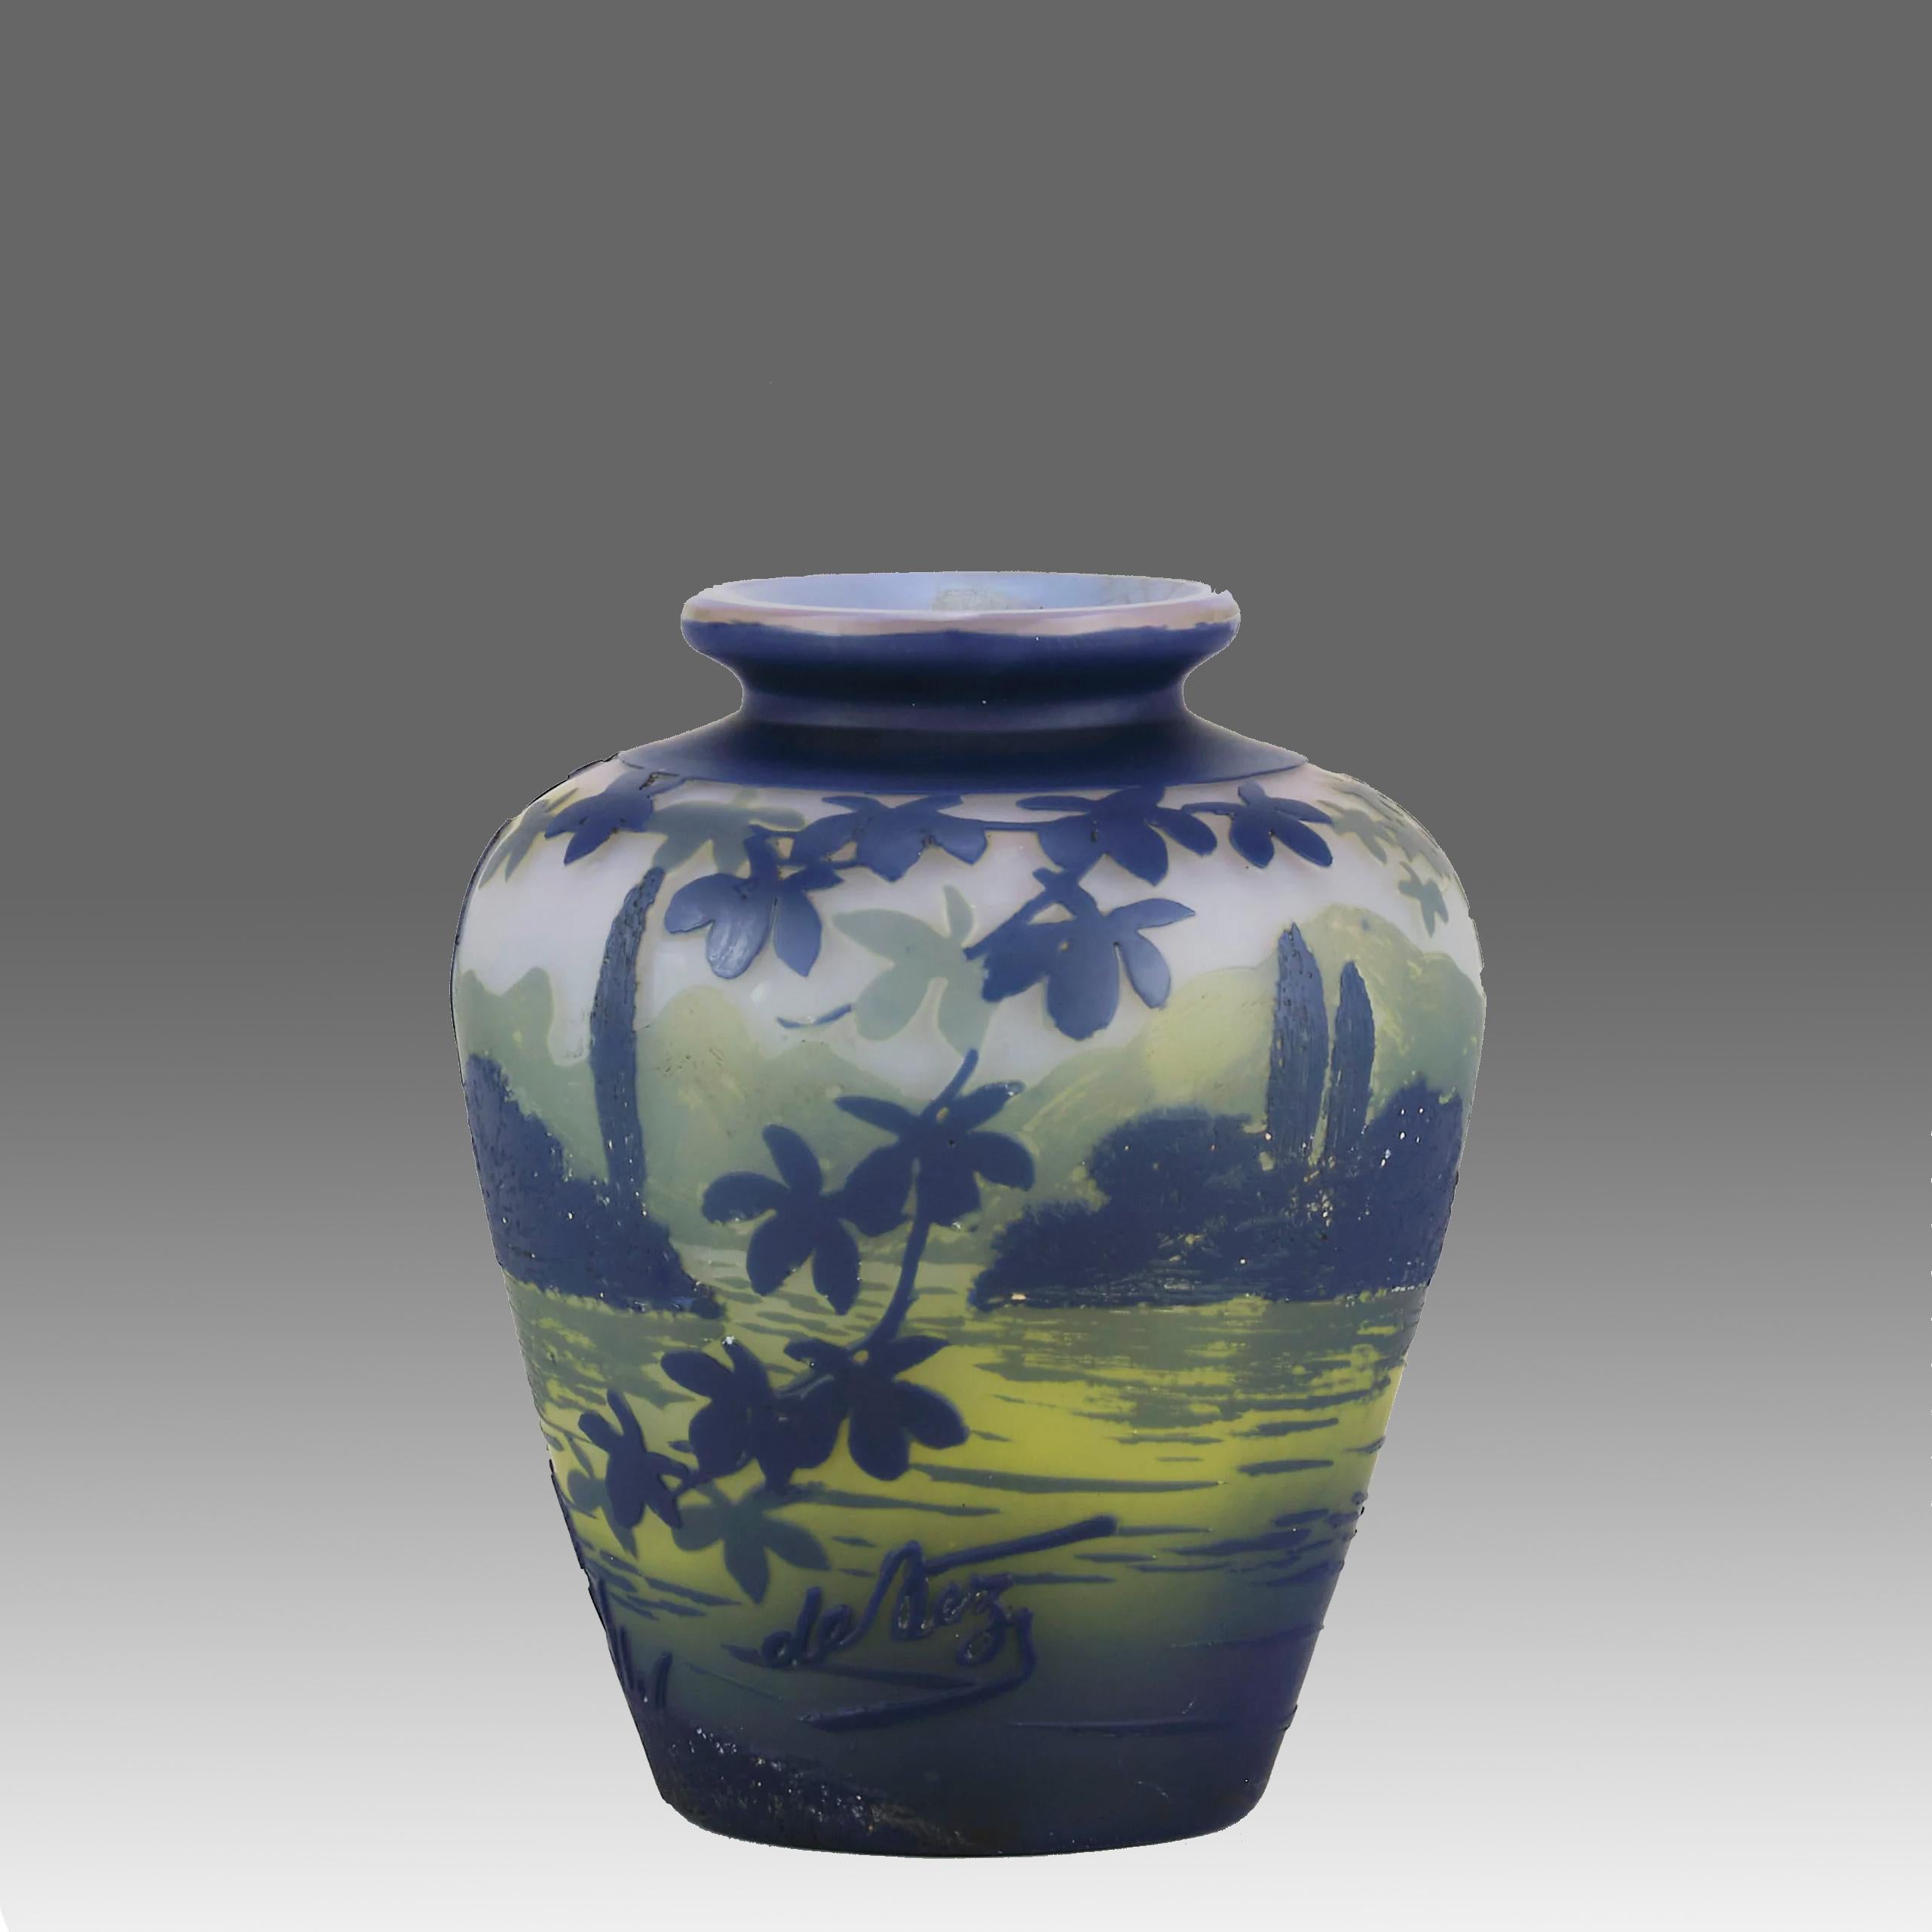 An attractive early 20th Century cameo glass vase acid cut and hand etched with a lake landscape in a deep blue colour against a green field with mountainous background, exhibiting excellent hand finished detail, signed De Vez

 ADDITIONAL